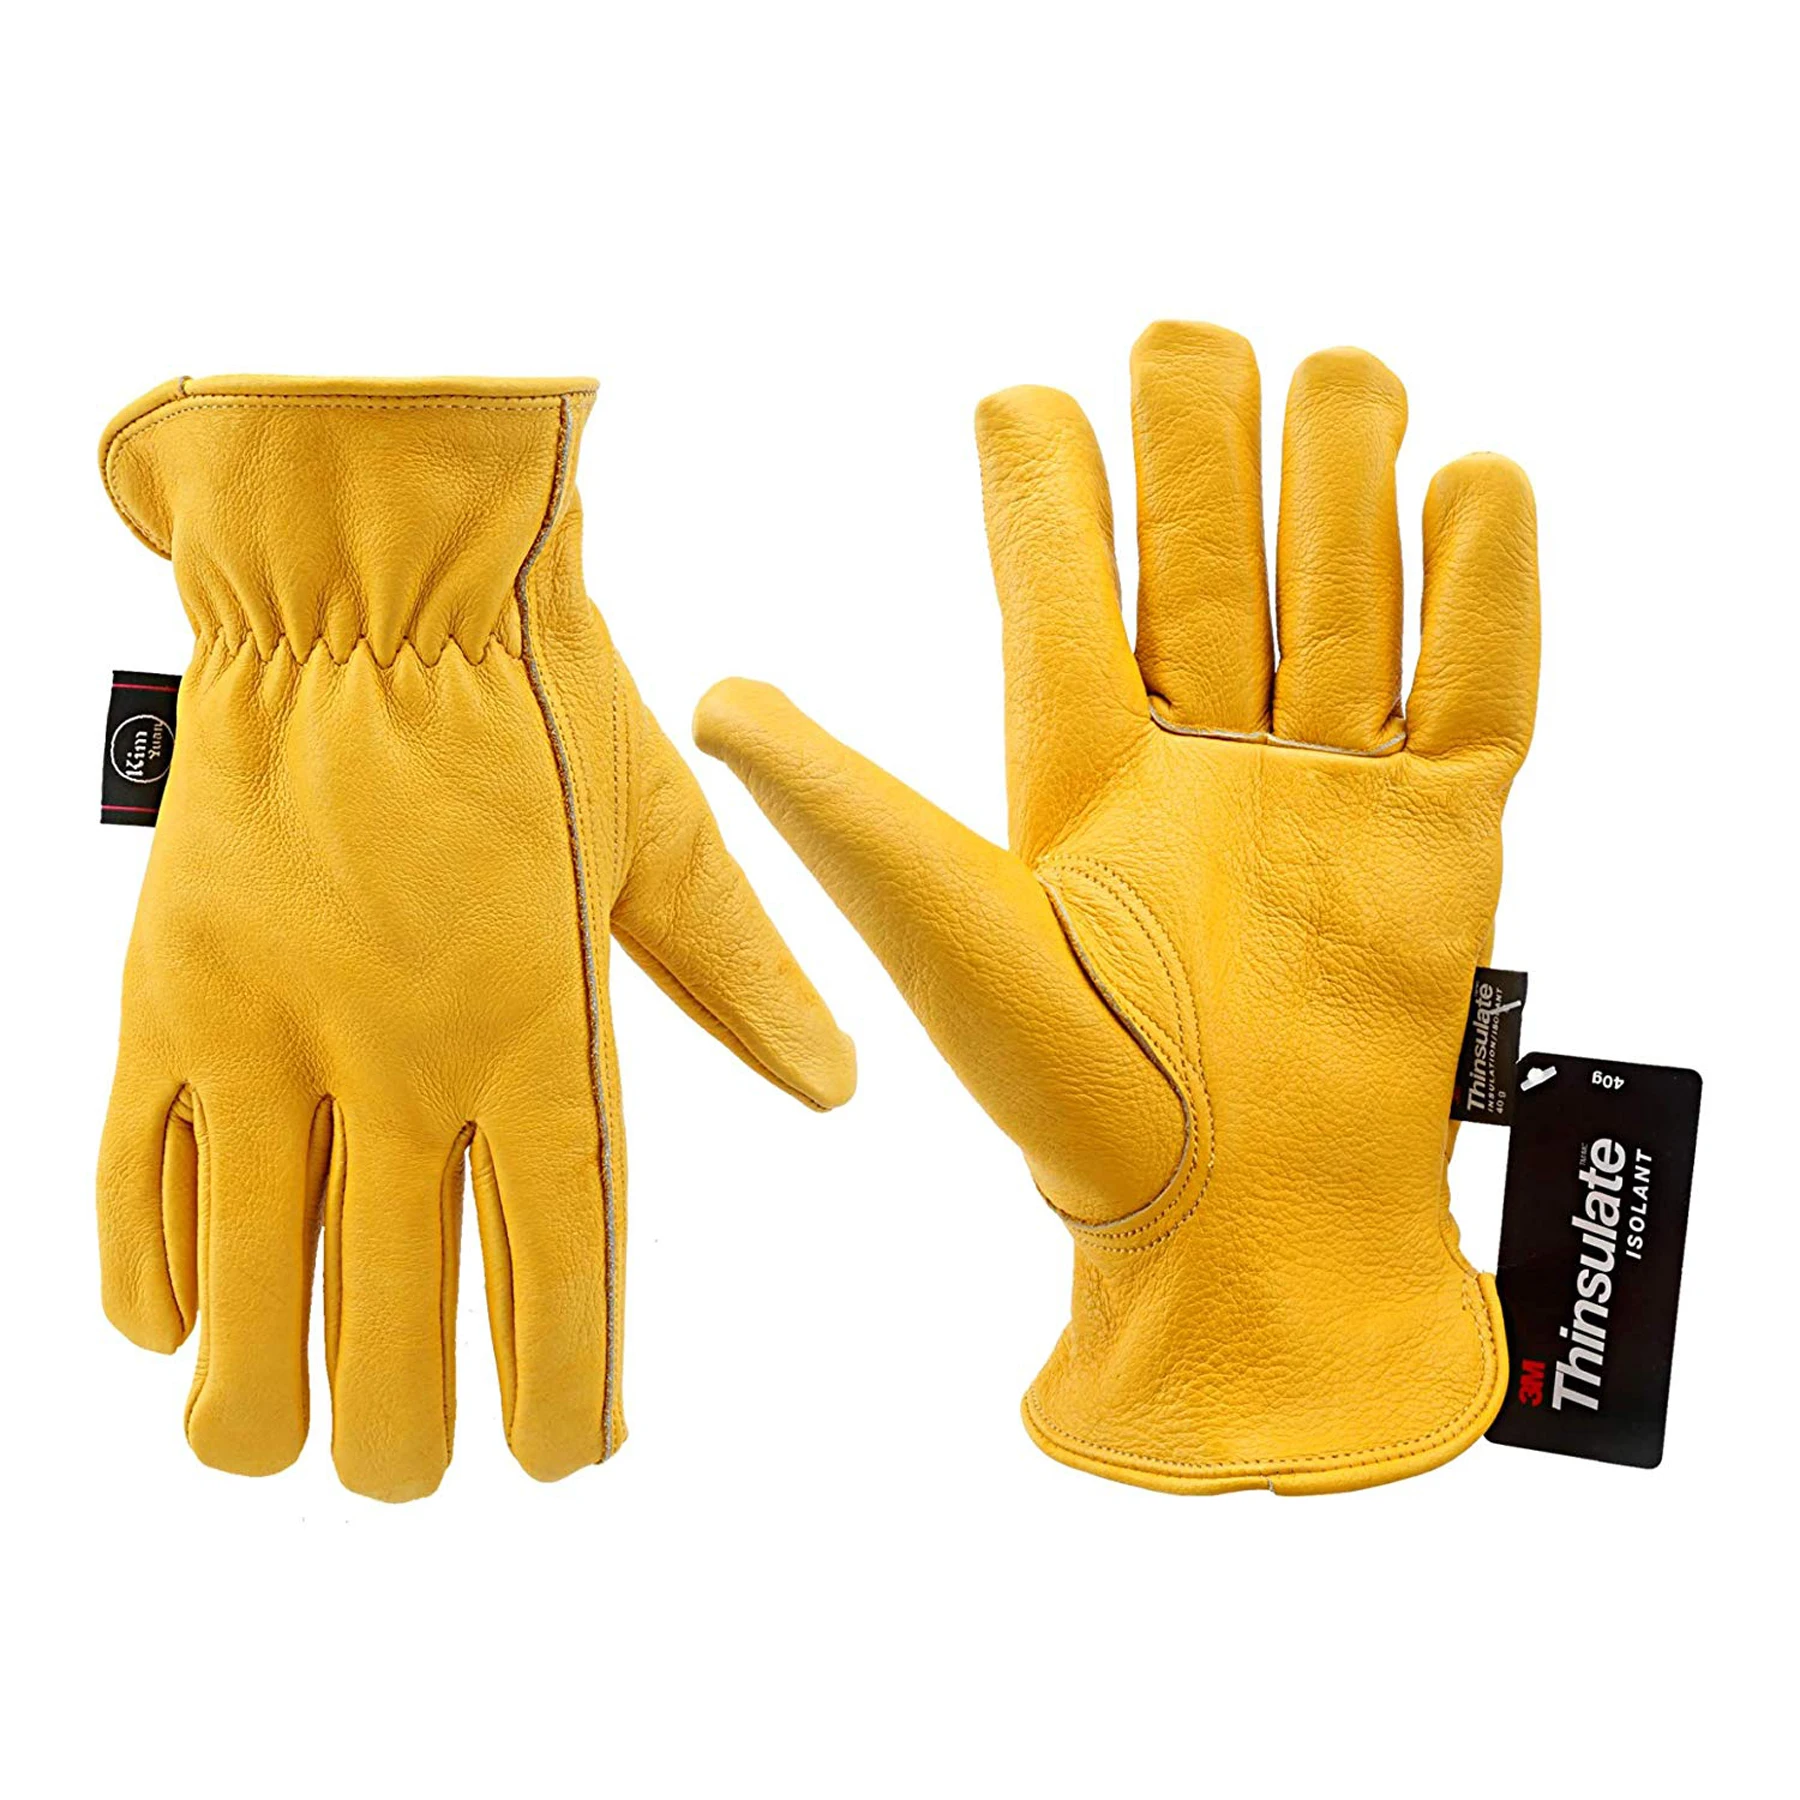 100 Pair Work Gloves Cowhide Driver Security Protection Wear Safety Workers Welding Gloves For Men qiangleaf brand new men s work gloves cowhide leather security protection wear men safety driver working welding glove 3zg